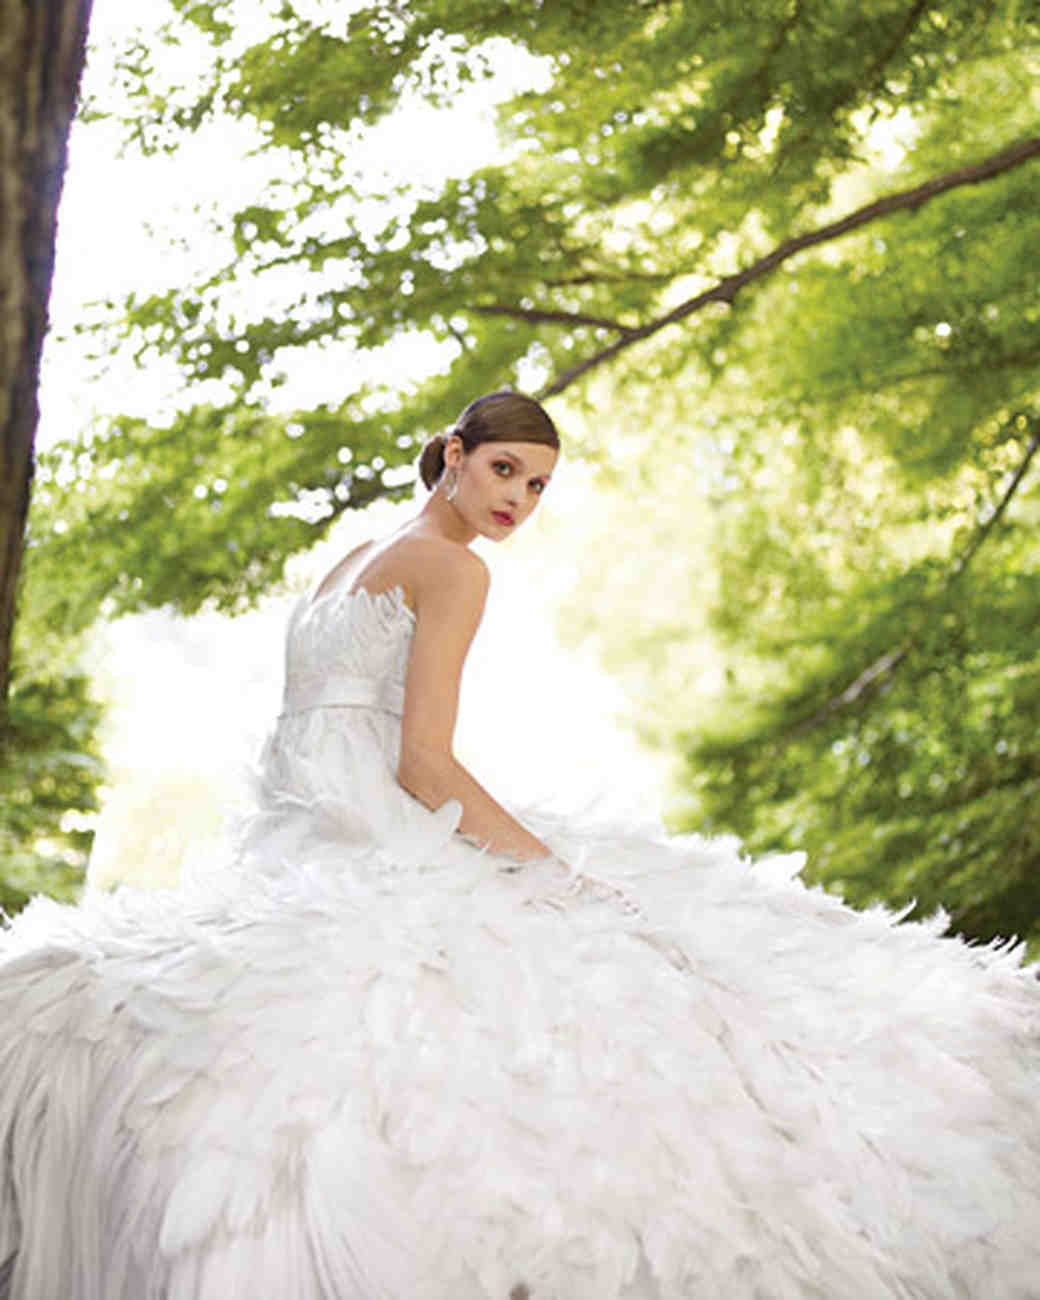 Outdoor Wedding Dresses
 Perfect Gowns for an Outdoor Wedding